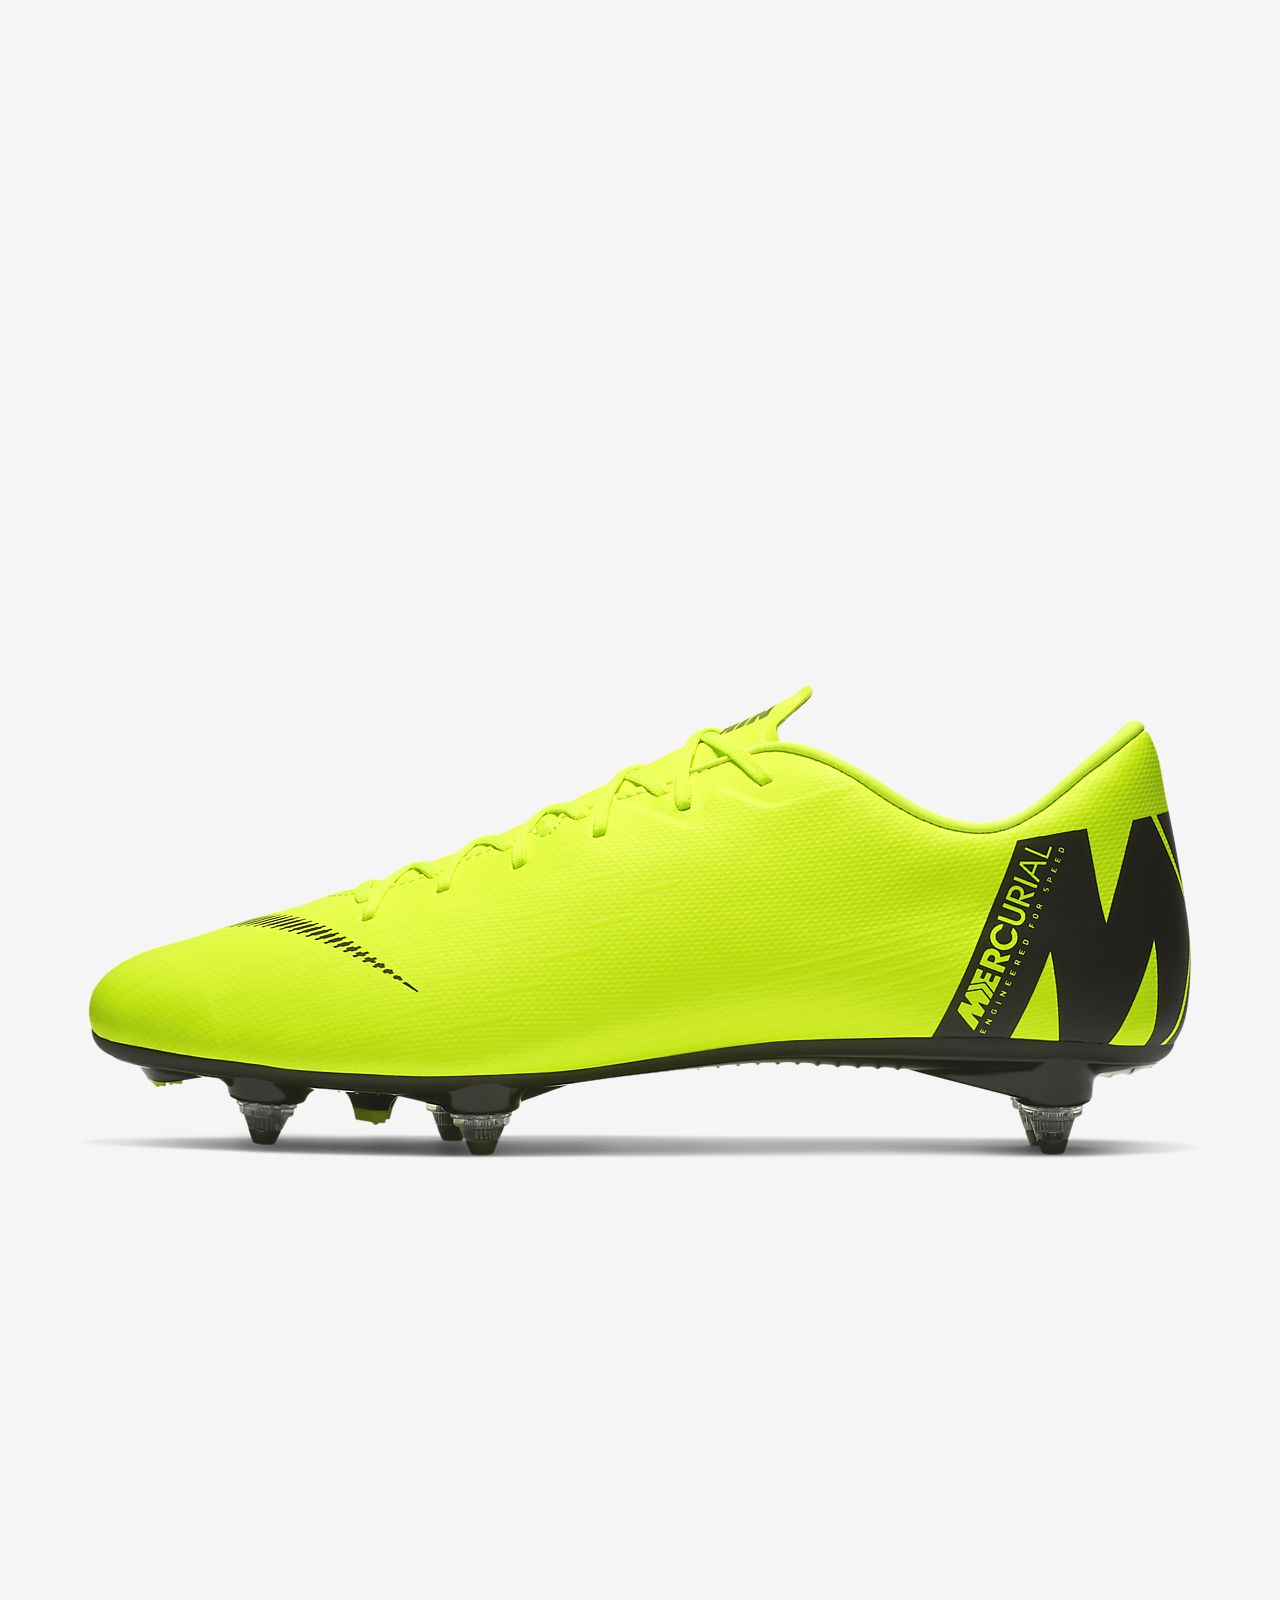 Nike Mercurial Vapor XII Elite FG Firm Ground Cleats Silver